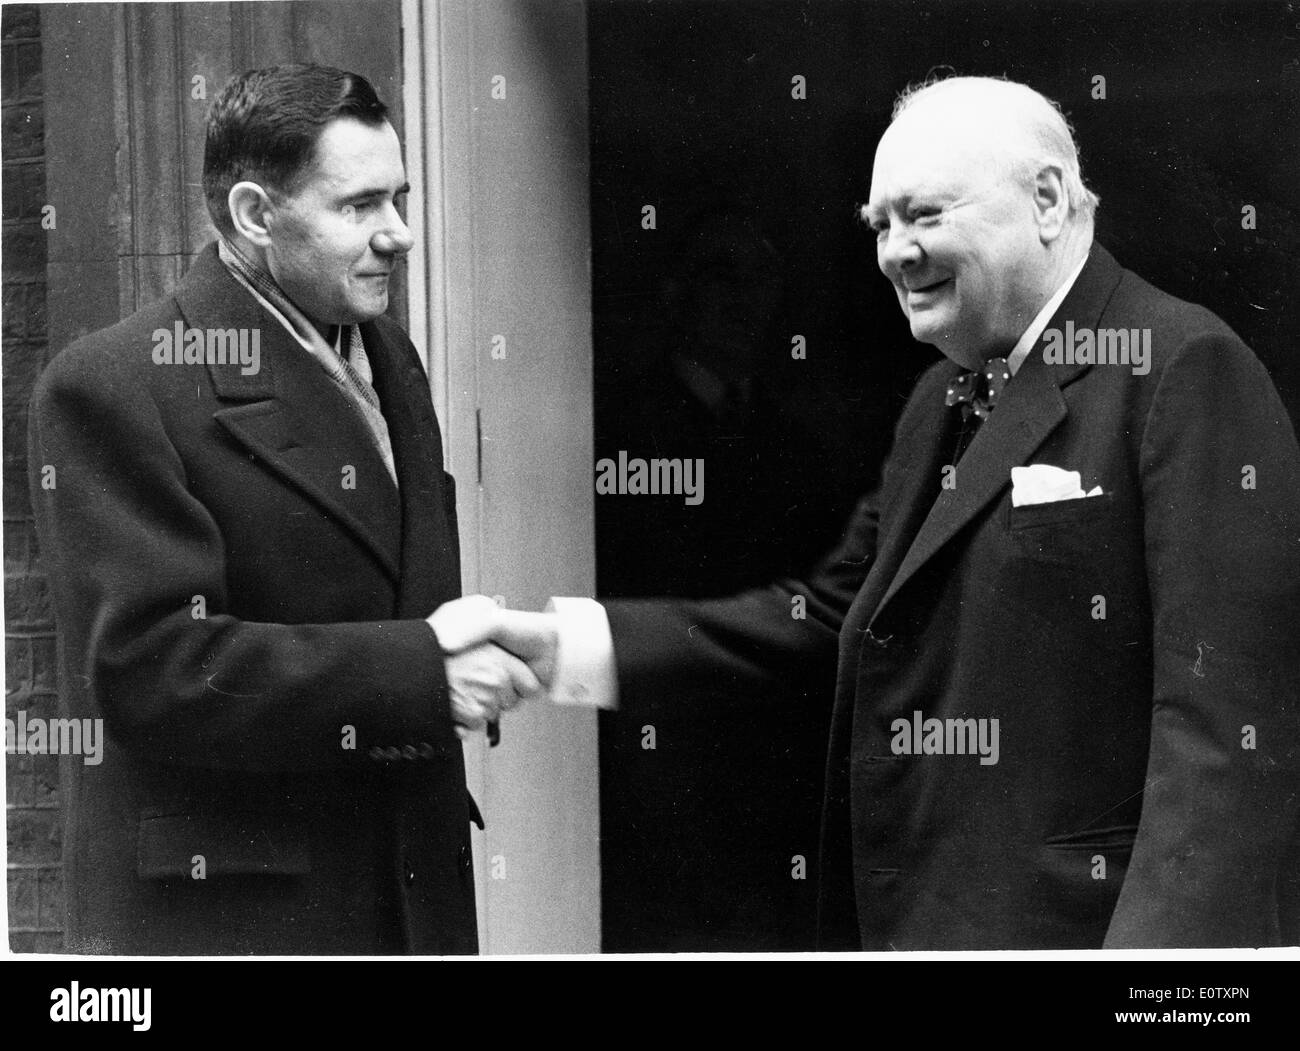 Andrei Gromyko shaking hands with another politician Stock Photo